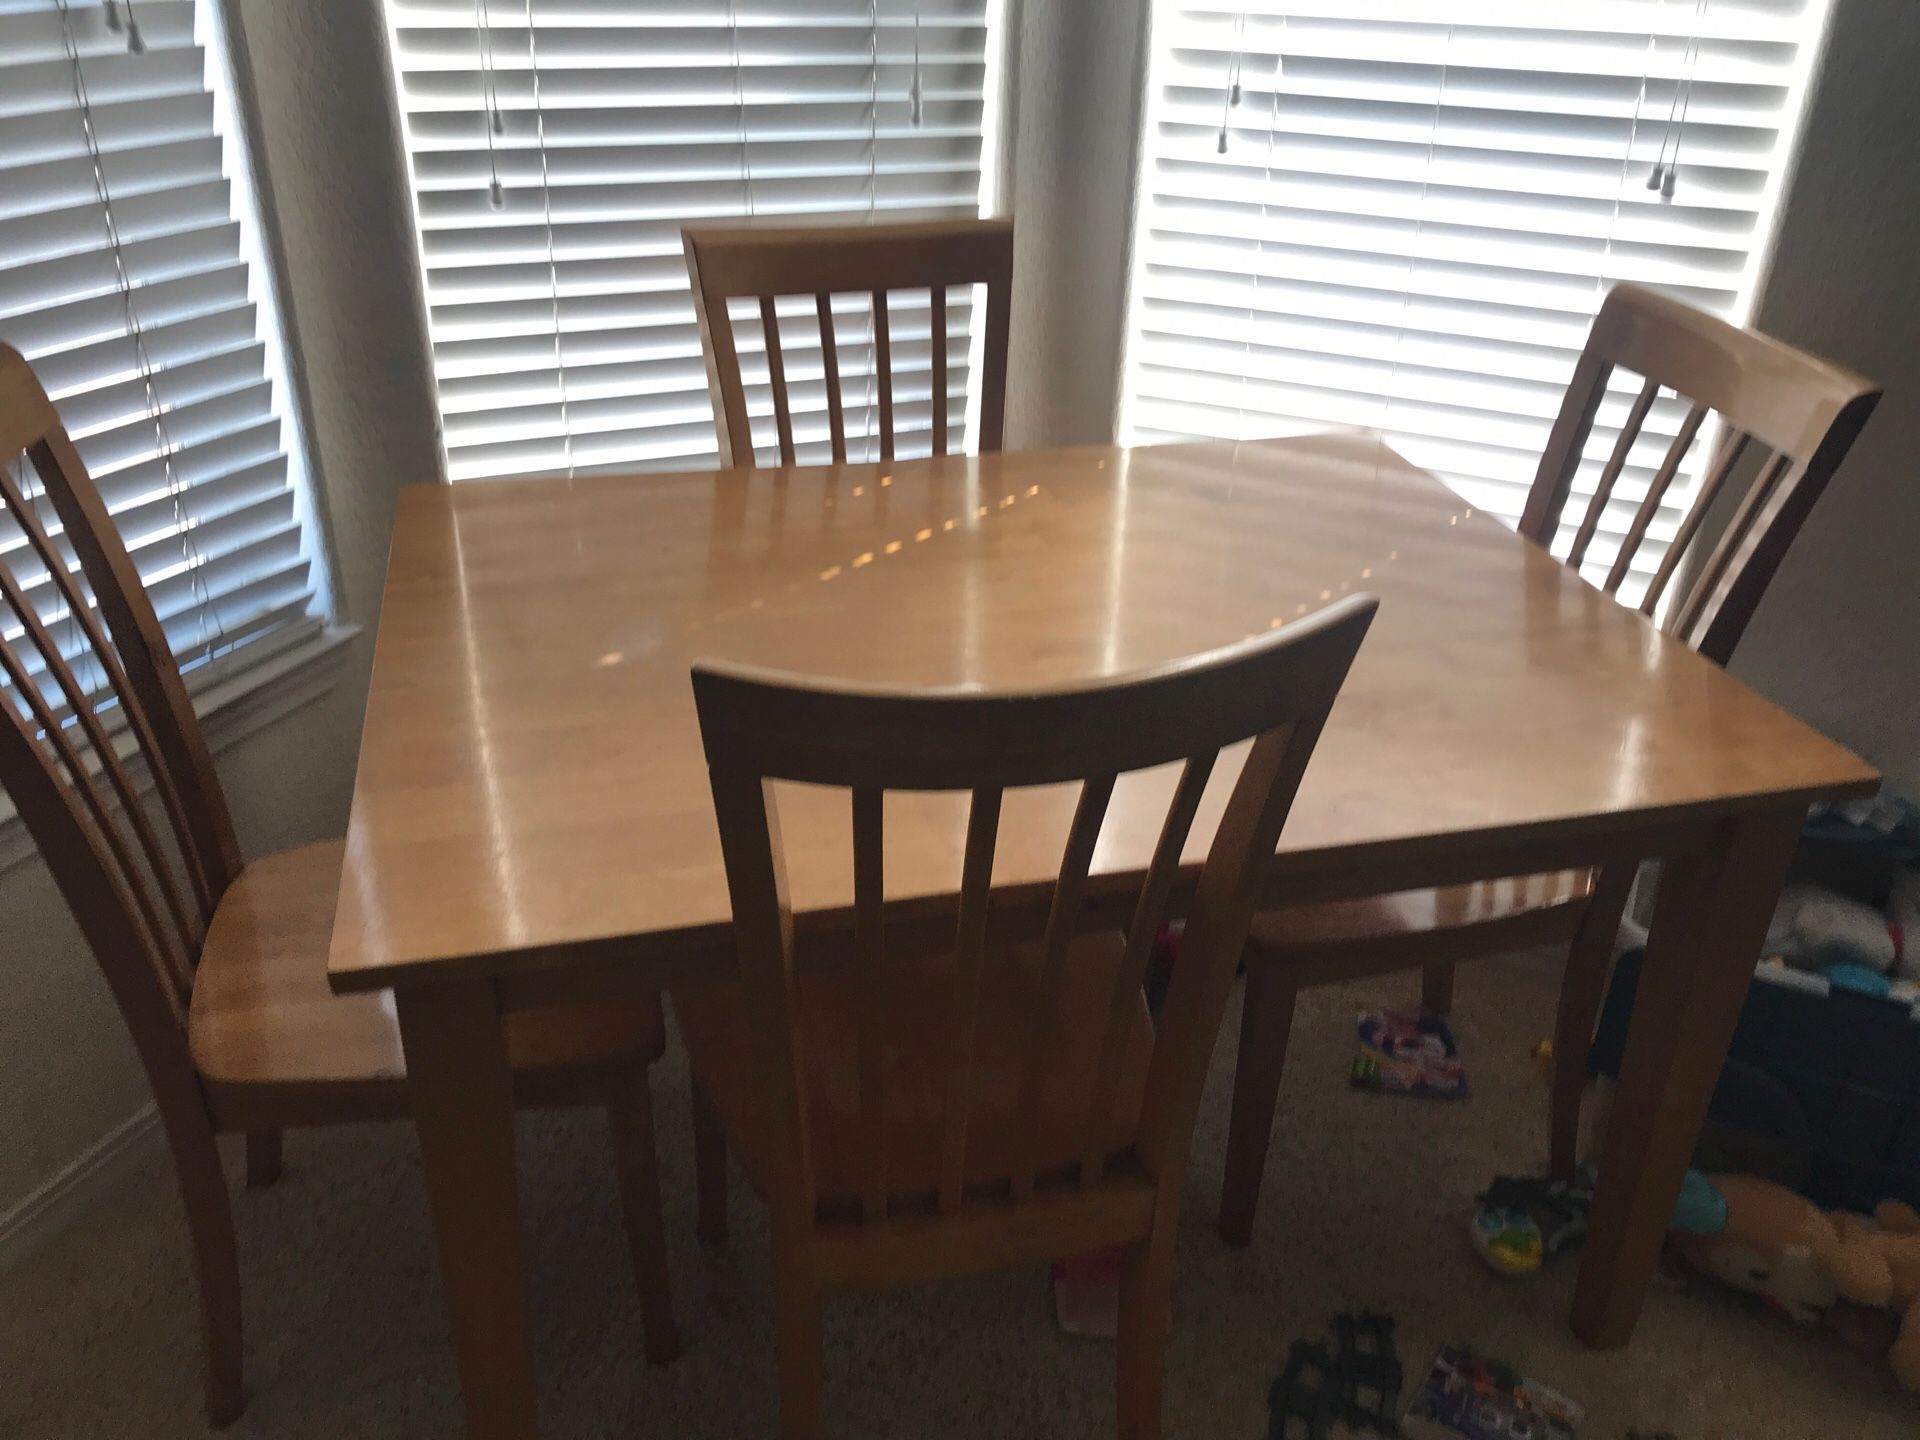 Kitchen table with 4 chairs. Table is 3’ W x 4’ L